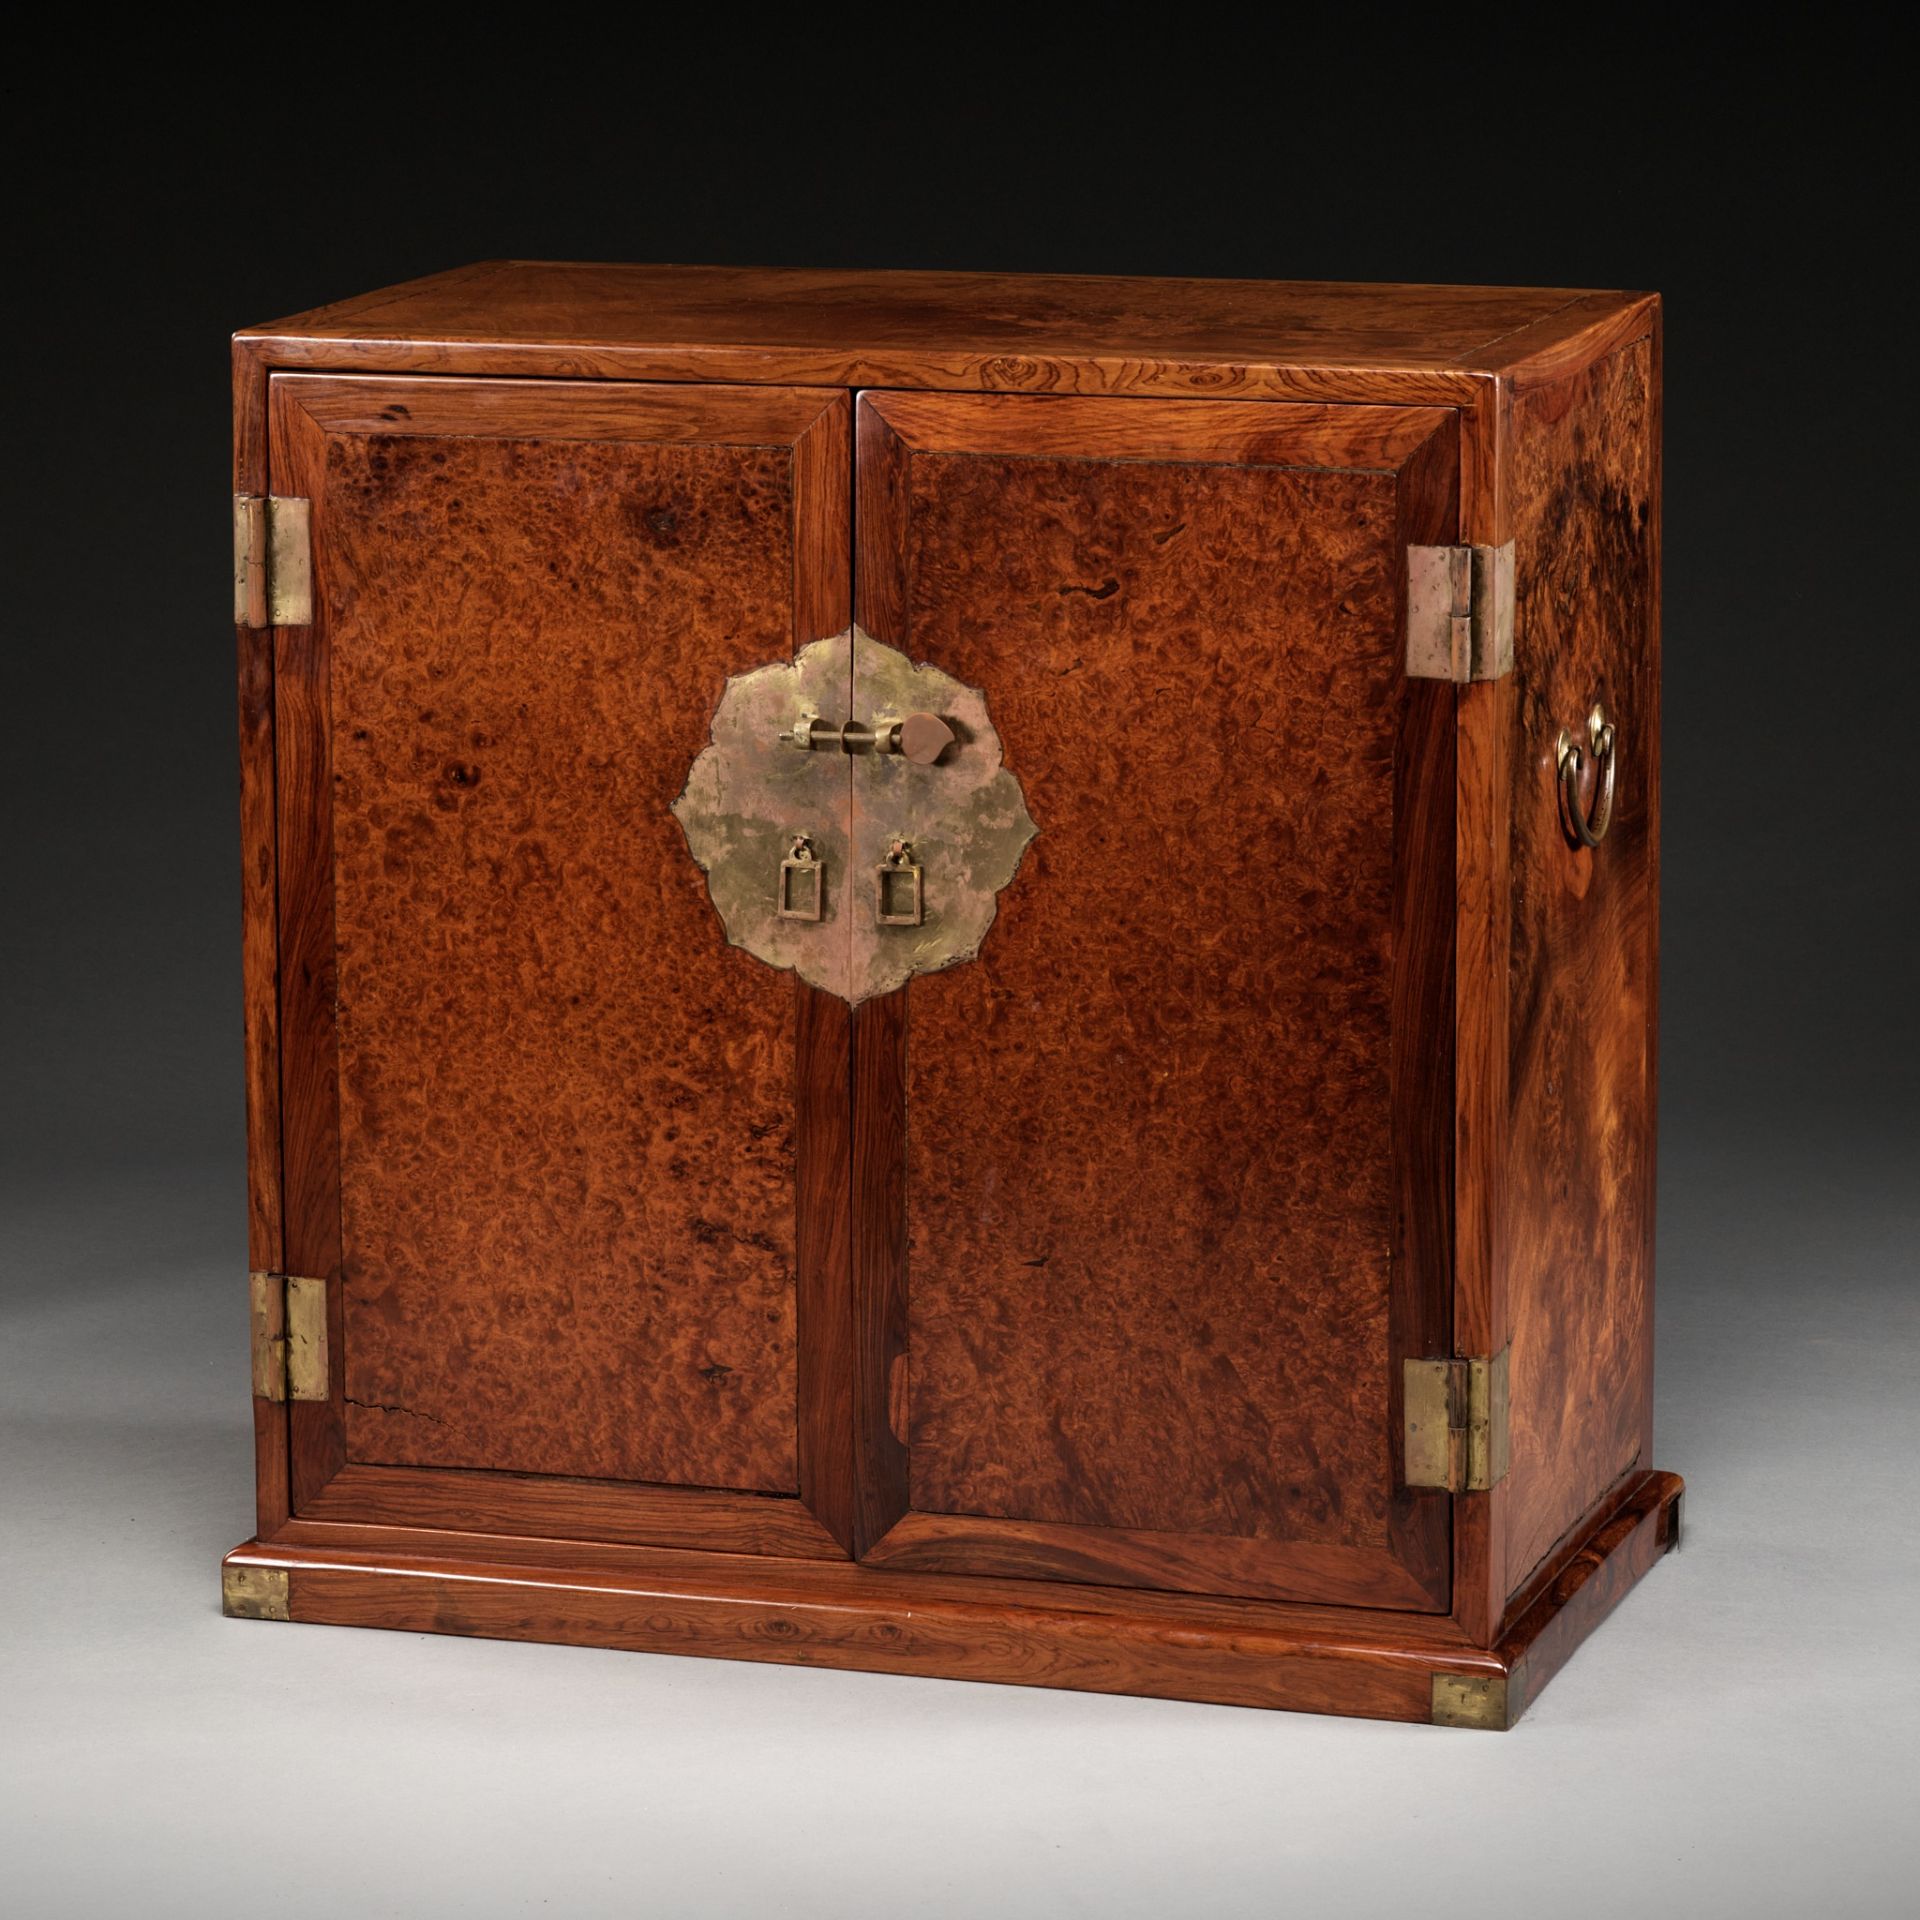 A LARGE HUANGHUALI APOTHECARY CABINET (YAOGUI) WITH FOURTEEN DRAWERS, EARLY QING DYNASTY